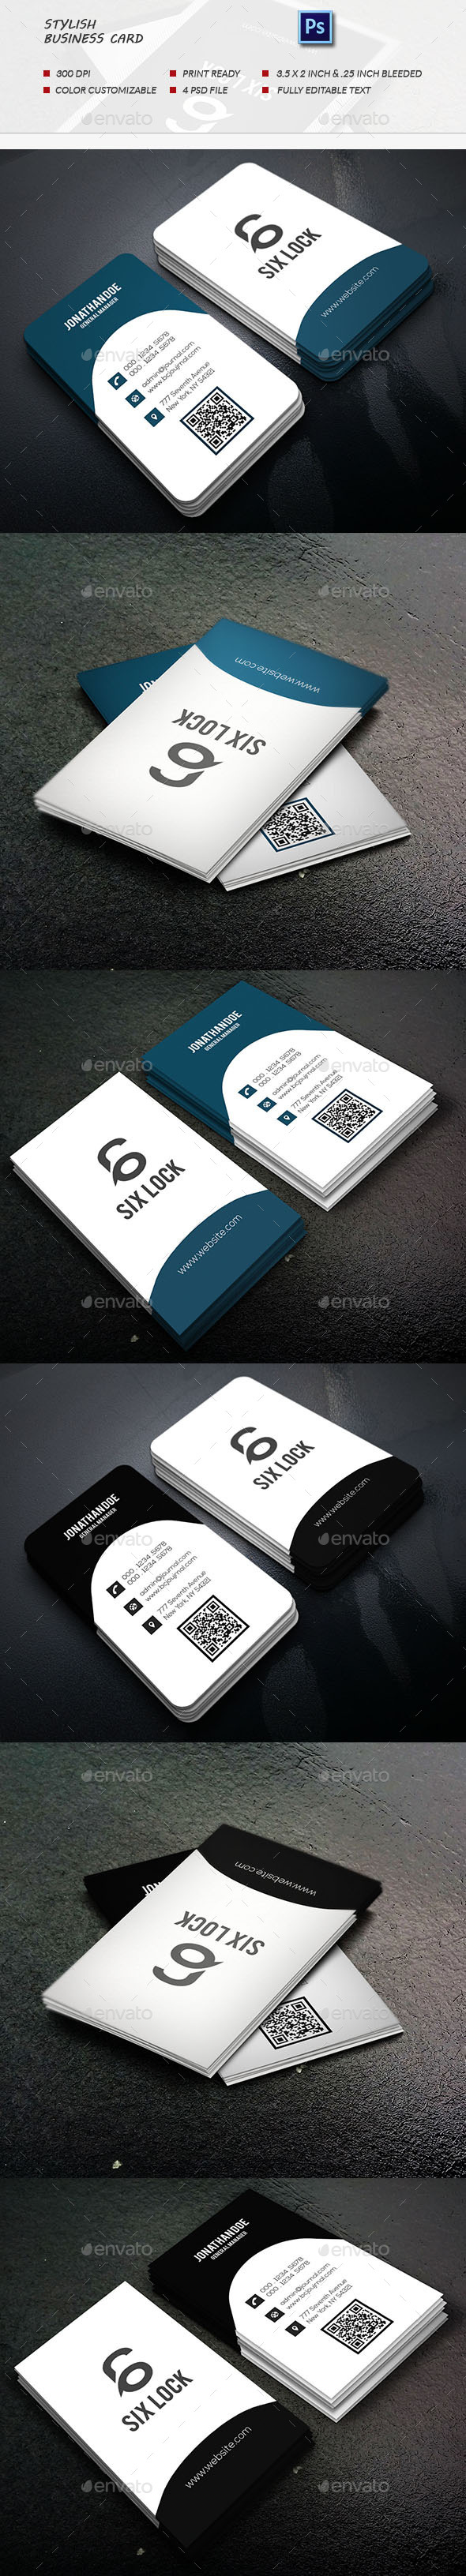 GraphicRiver Stylish Business Card 11892549